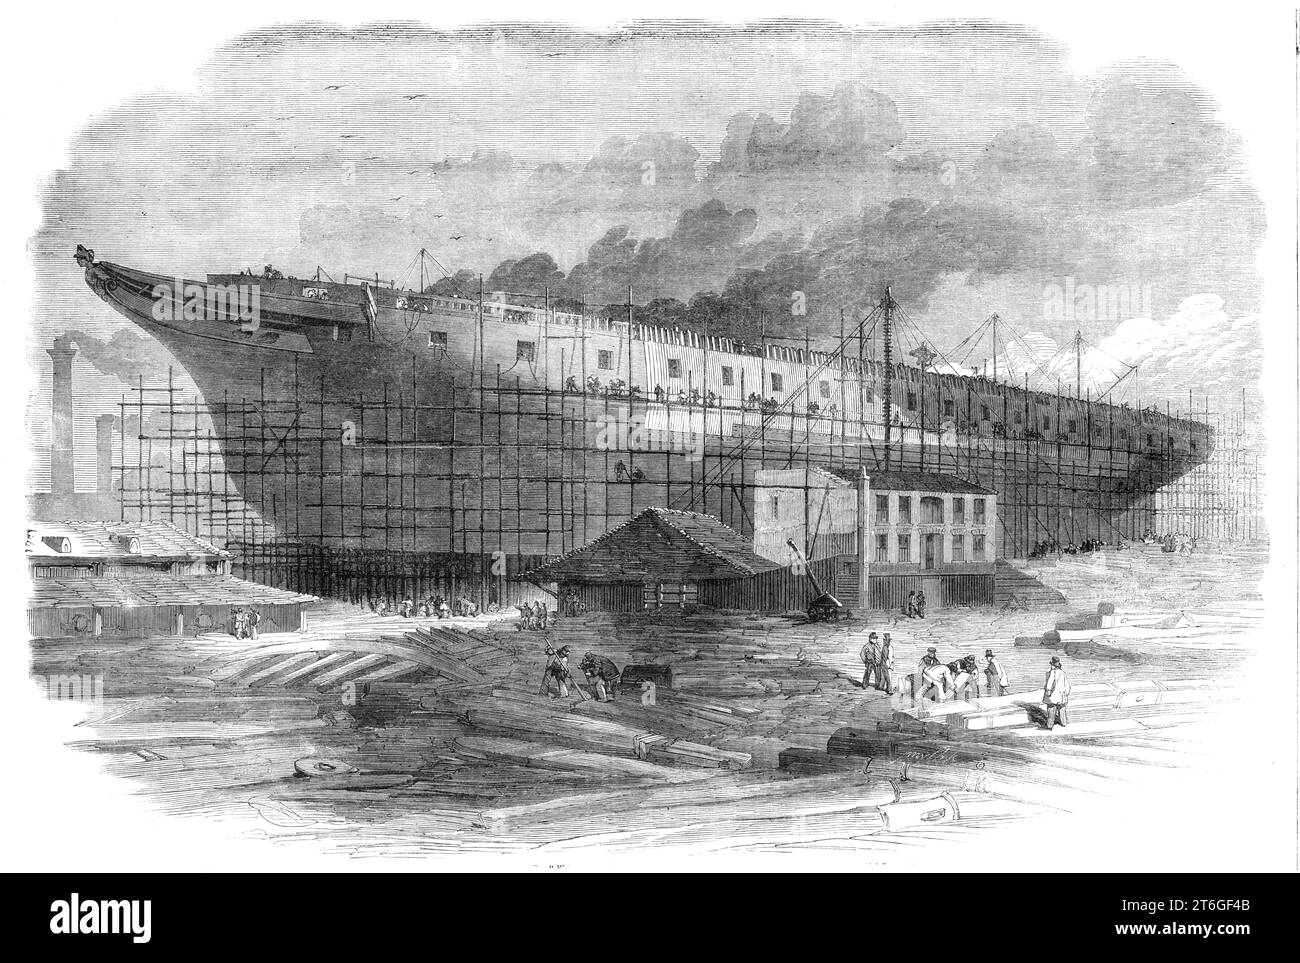 Building the great steam-frigate &quot;Warrior&quot; at the Thames Ironworks, Blackwall, 1860. Admiral Sir Baldwin Wake Walker, Surveyor of the Navy, was responsible for the Royal Navy's warship construction programme during the 1850s naval arms race and at the time of the introduction of the Ironclad warship. It was his decision to build HMS Warrior. She was the second largest ship in the world, after the Great Eastern, and was constructed, 'under the immediate superintendence of Captain Ford, the managing director'. The Warrior was armour plated, and built to carry 36 guns. From &quot;Illust Stock Photo